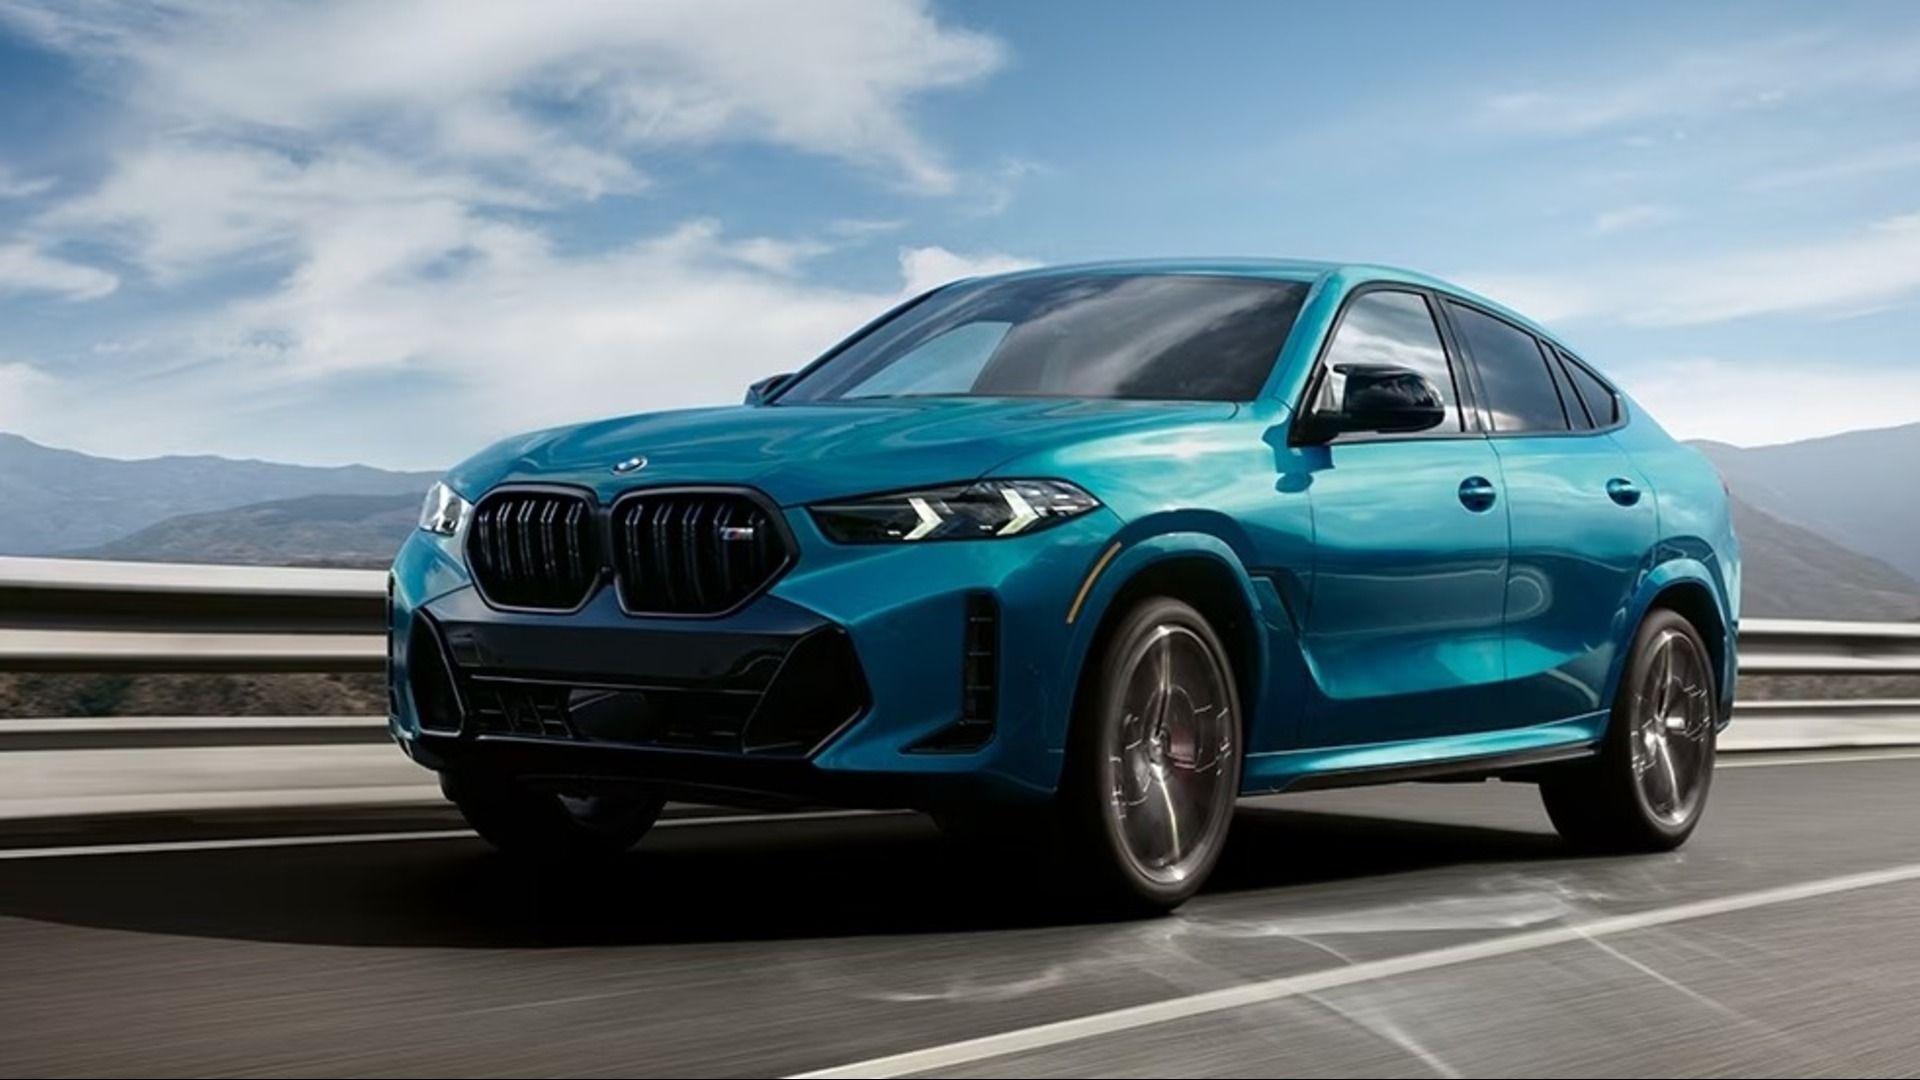 A BMW X6 in iconic BMW blue on the road